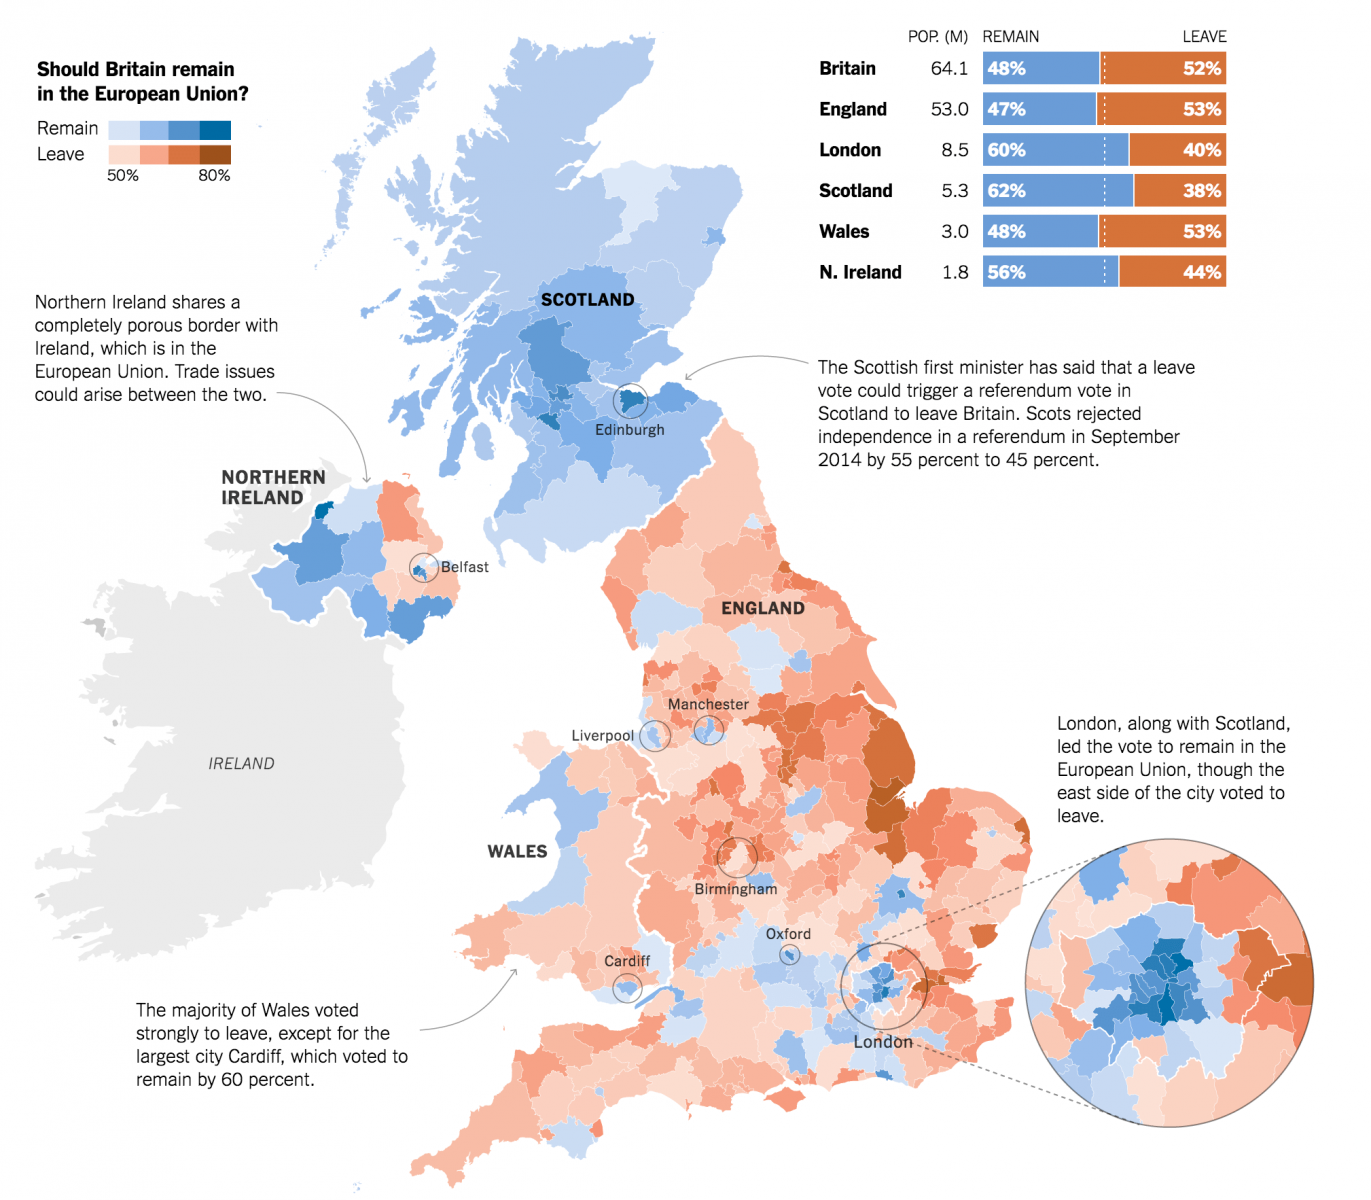 Source: New York Times, How Britain Voted in the E.U. Referendum